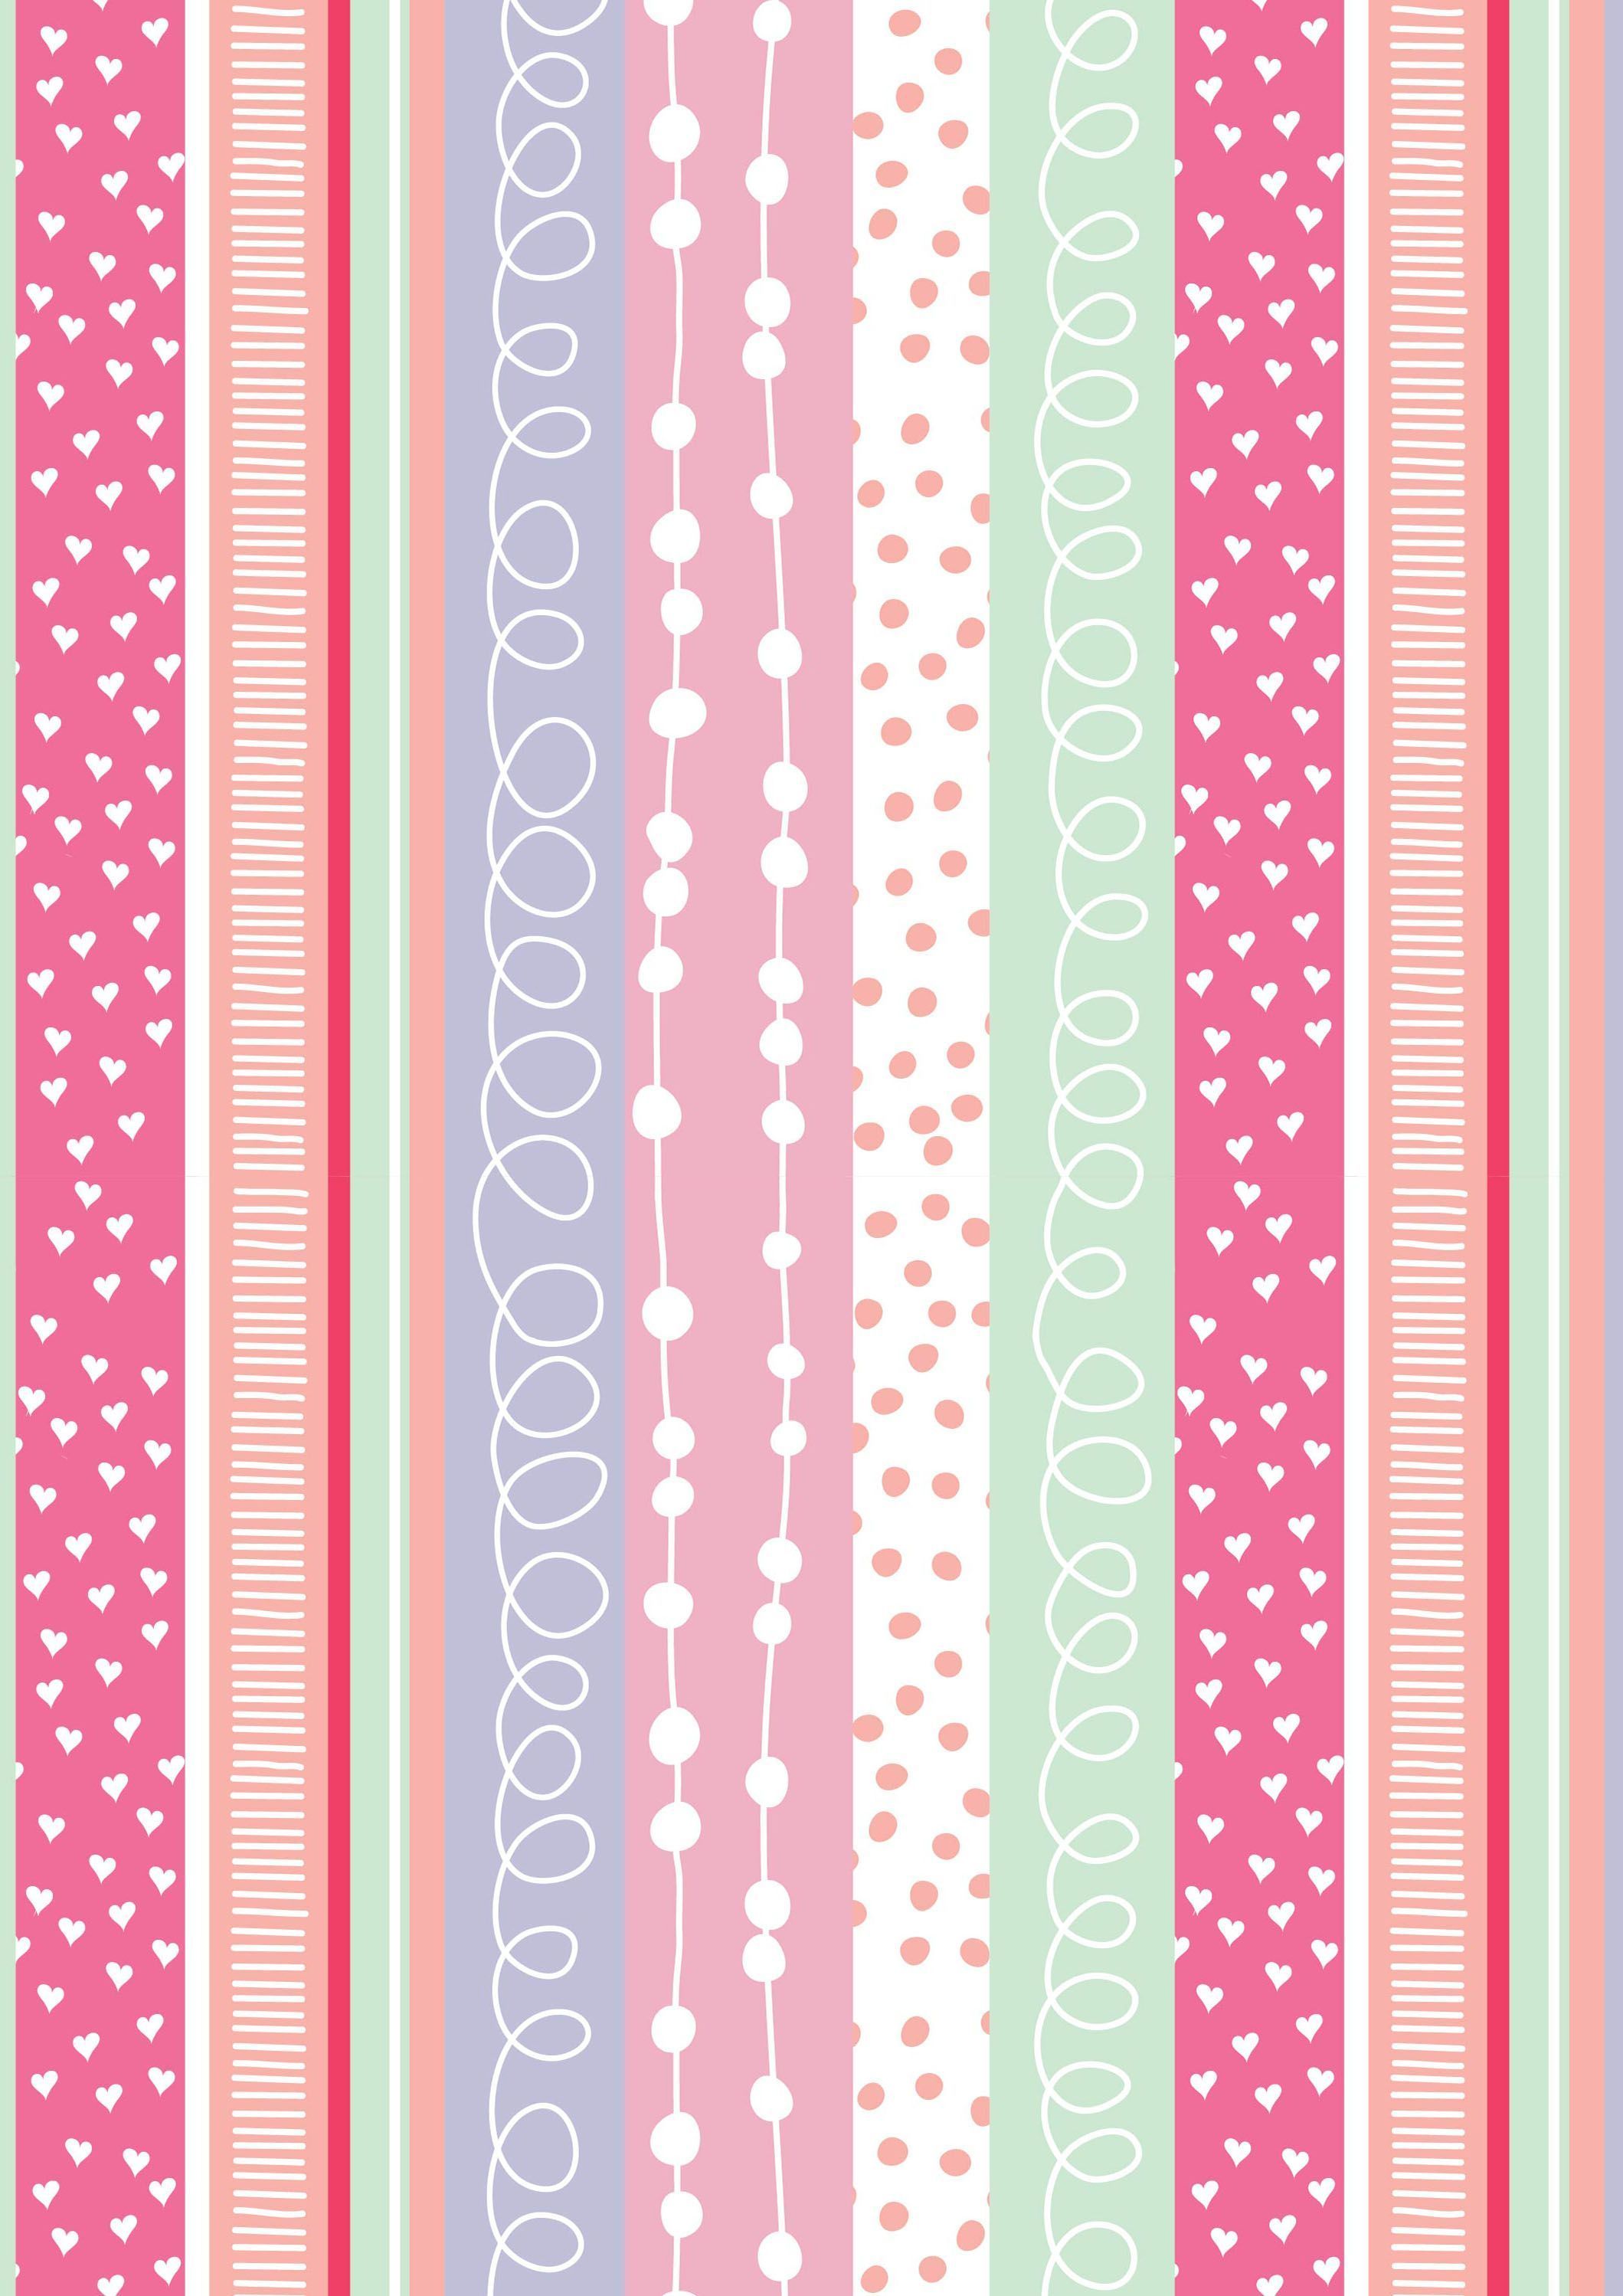 Scrapbook Aesthetic Wallpaper Print It On Sticker Paper Can Use To Scrapbook Phone Background. Sticker paper, Aesthetic wallpaper, Scrapbook paper